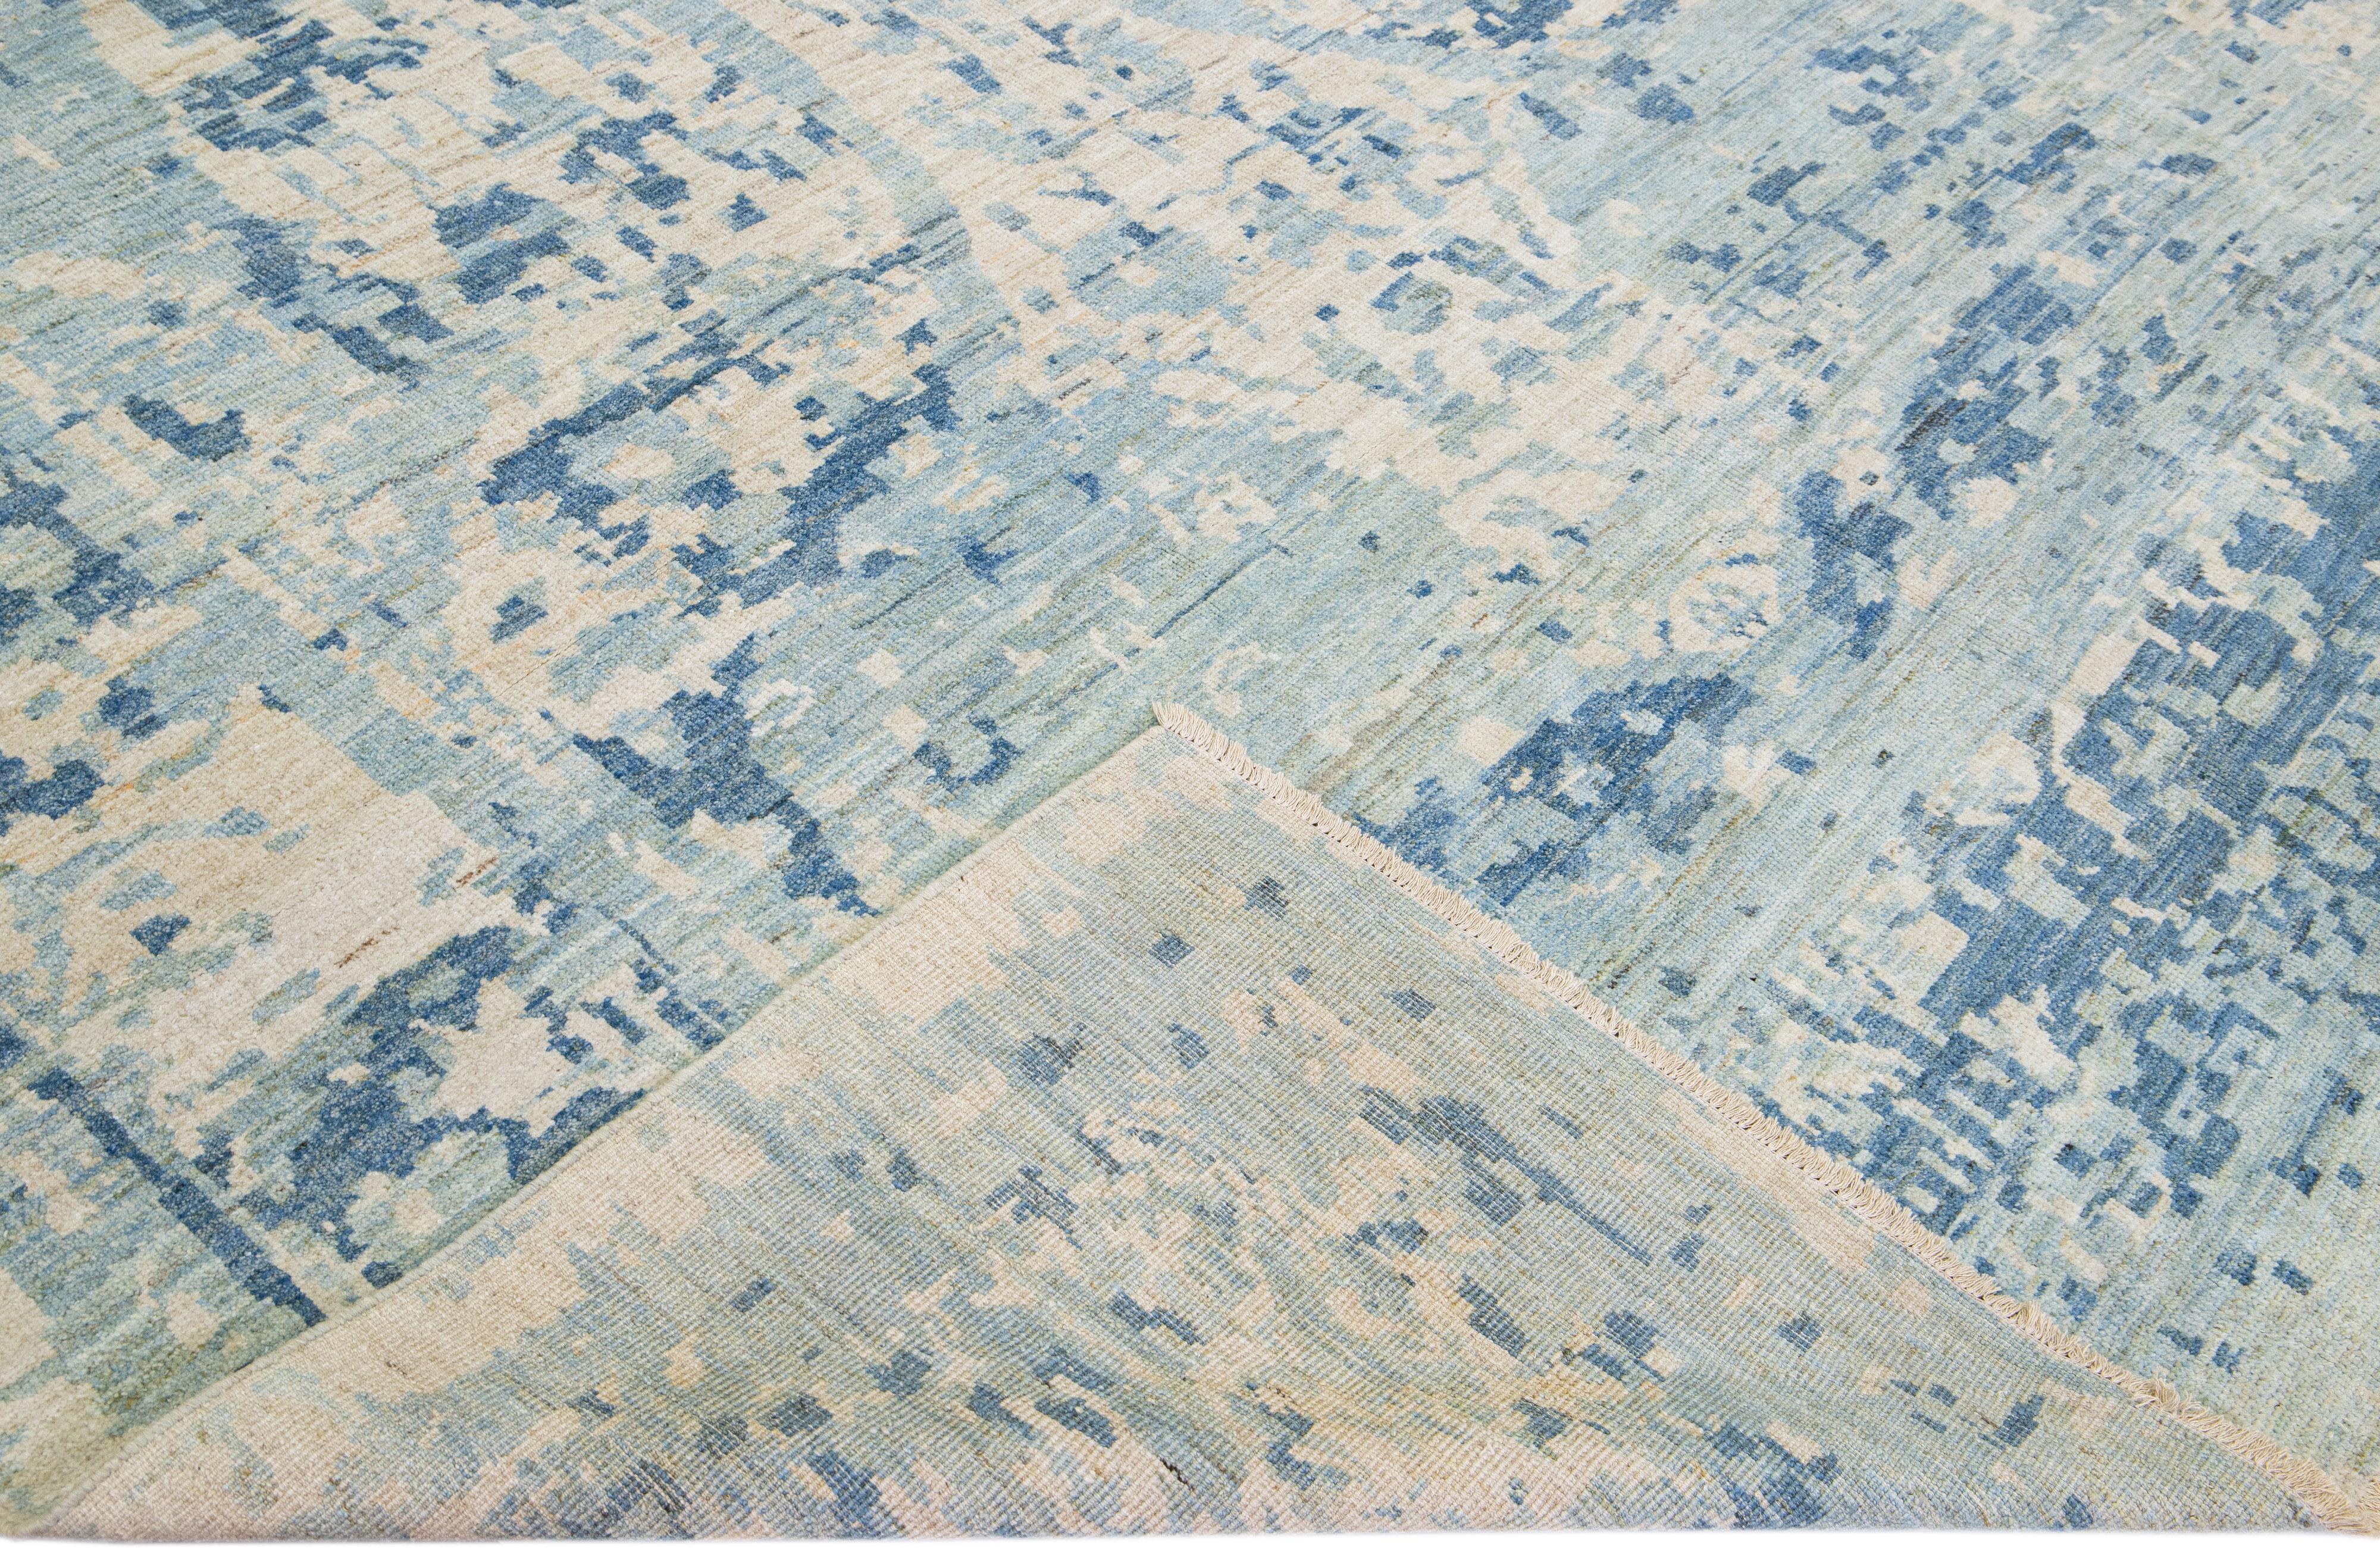 Beautiful modern Sultanabad hand-knotted wool rug with a blue field. This Sultanabad rug has beige accents in a gorgeous all-over classic floral pattern design.

This rug measures: 9